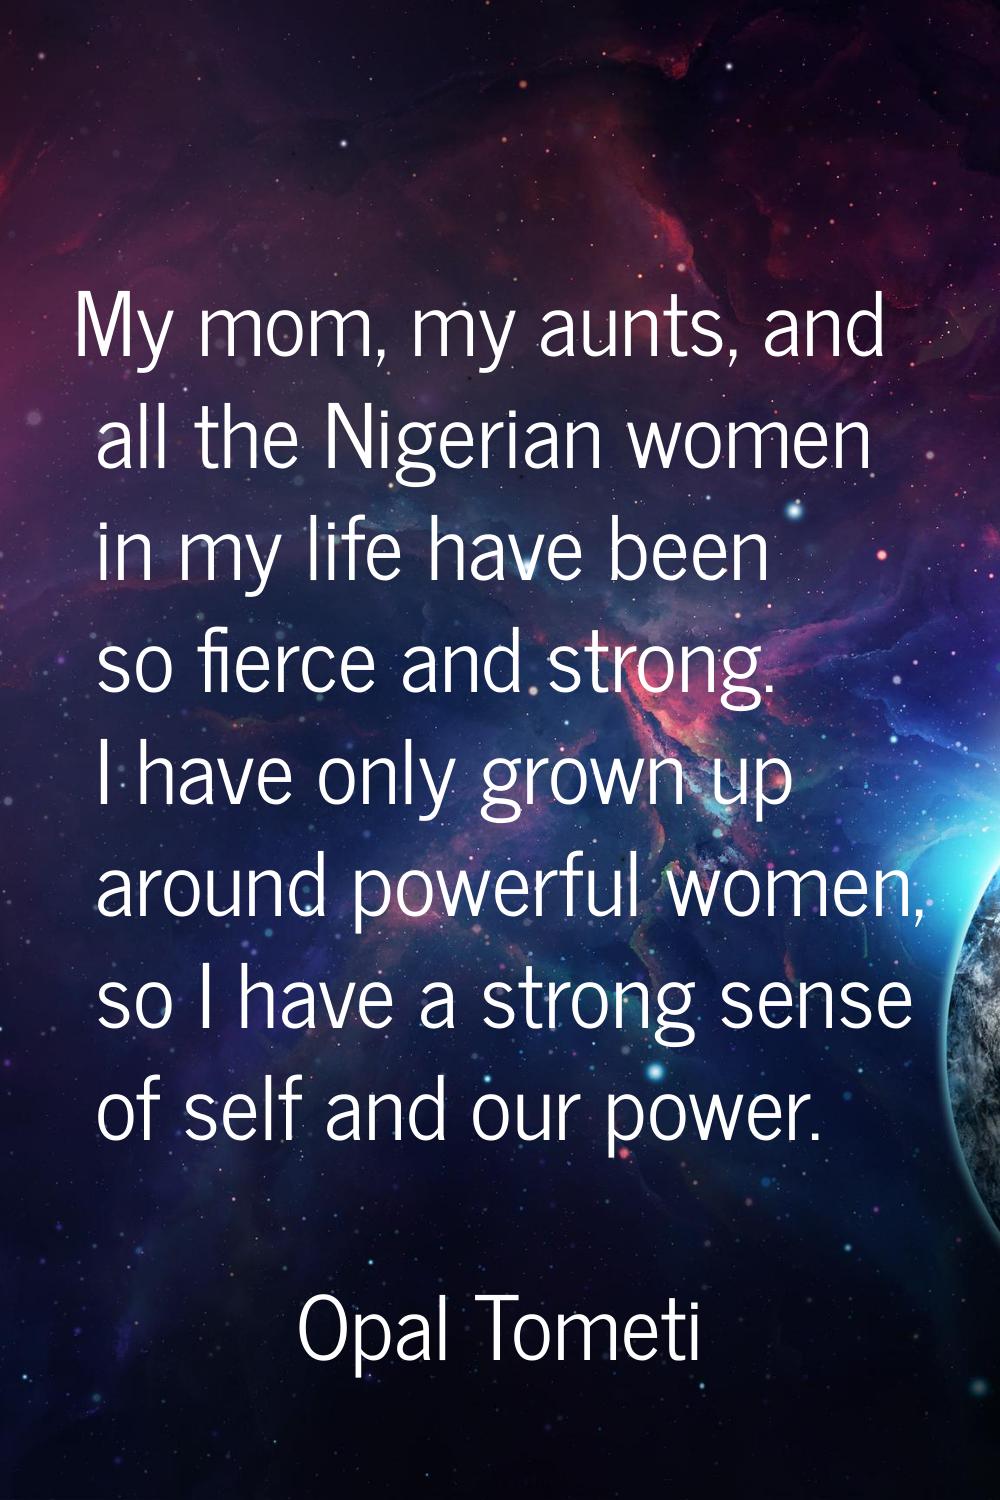 My mom, my aunts, and all the Nigerian women in my life have been so fierce and strong. I have only